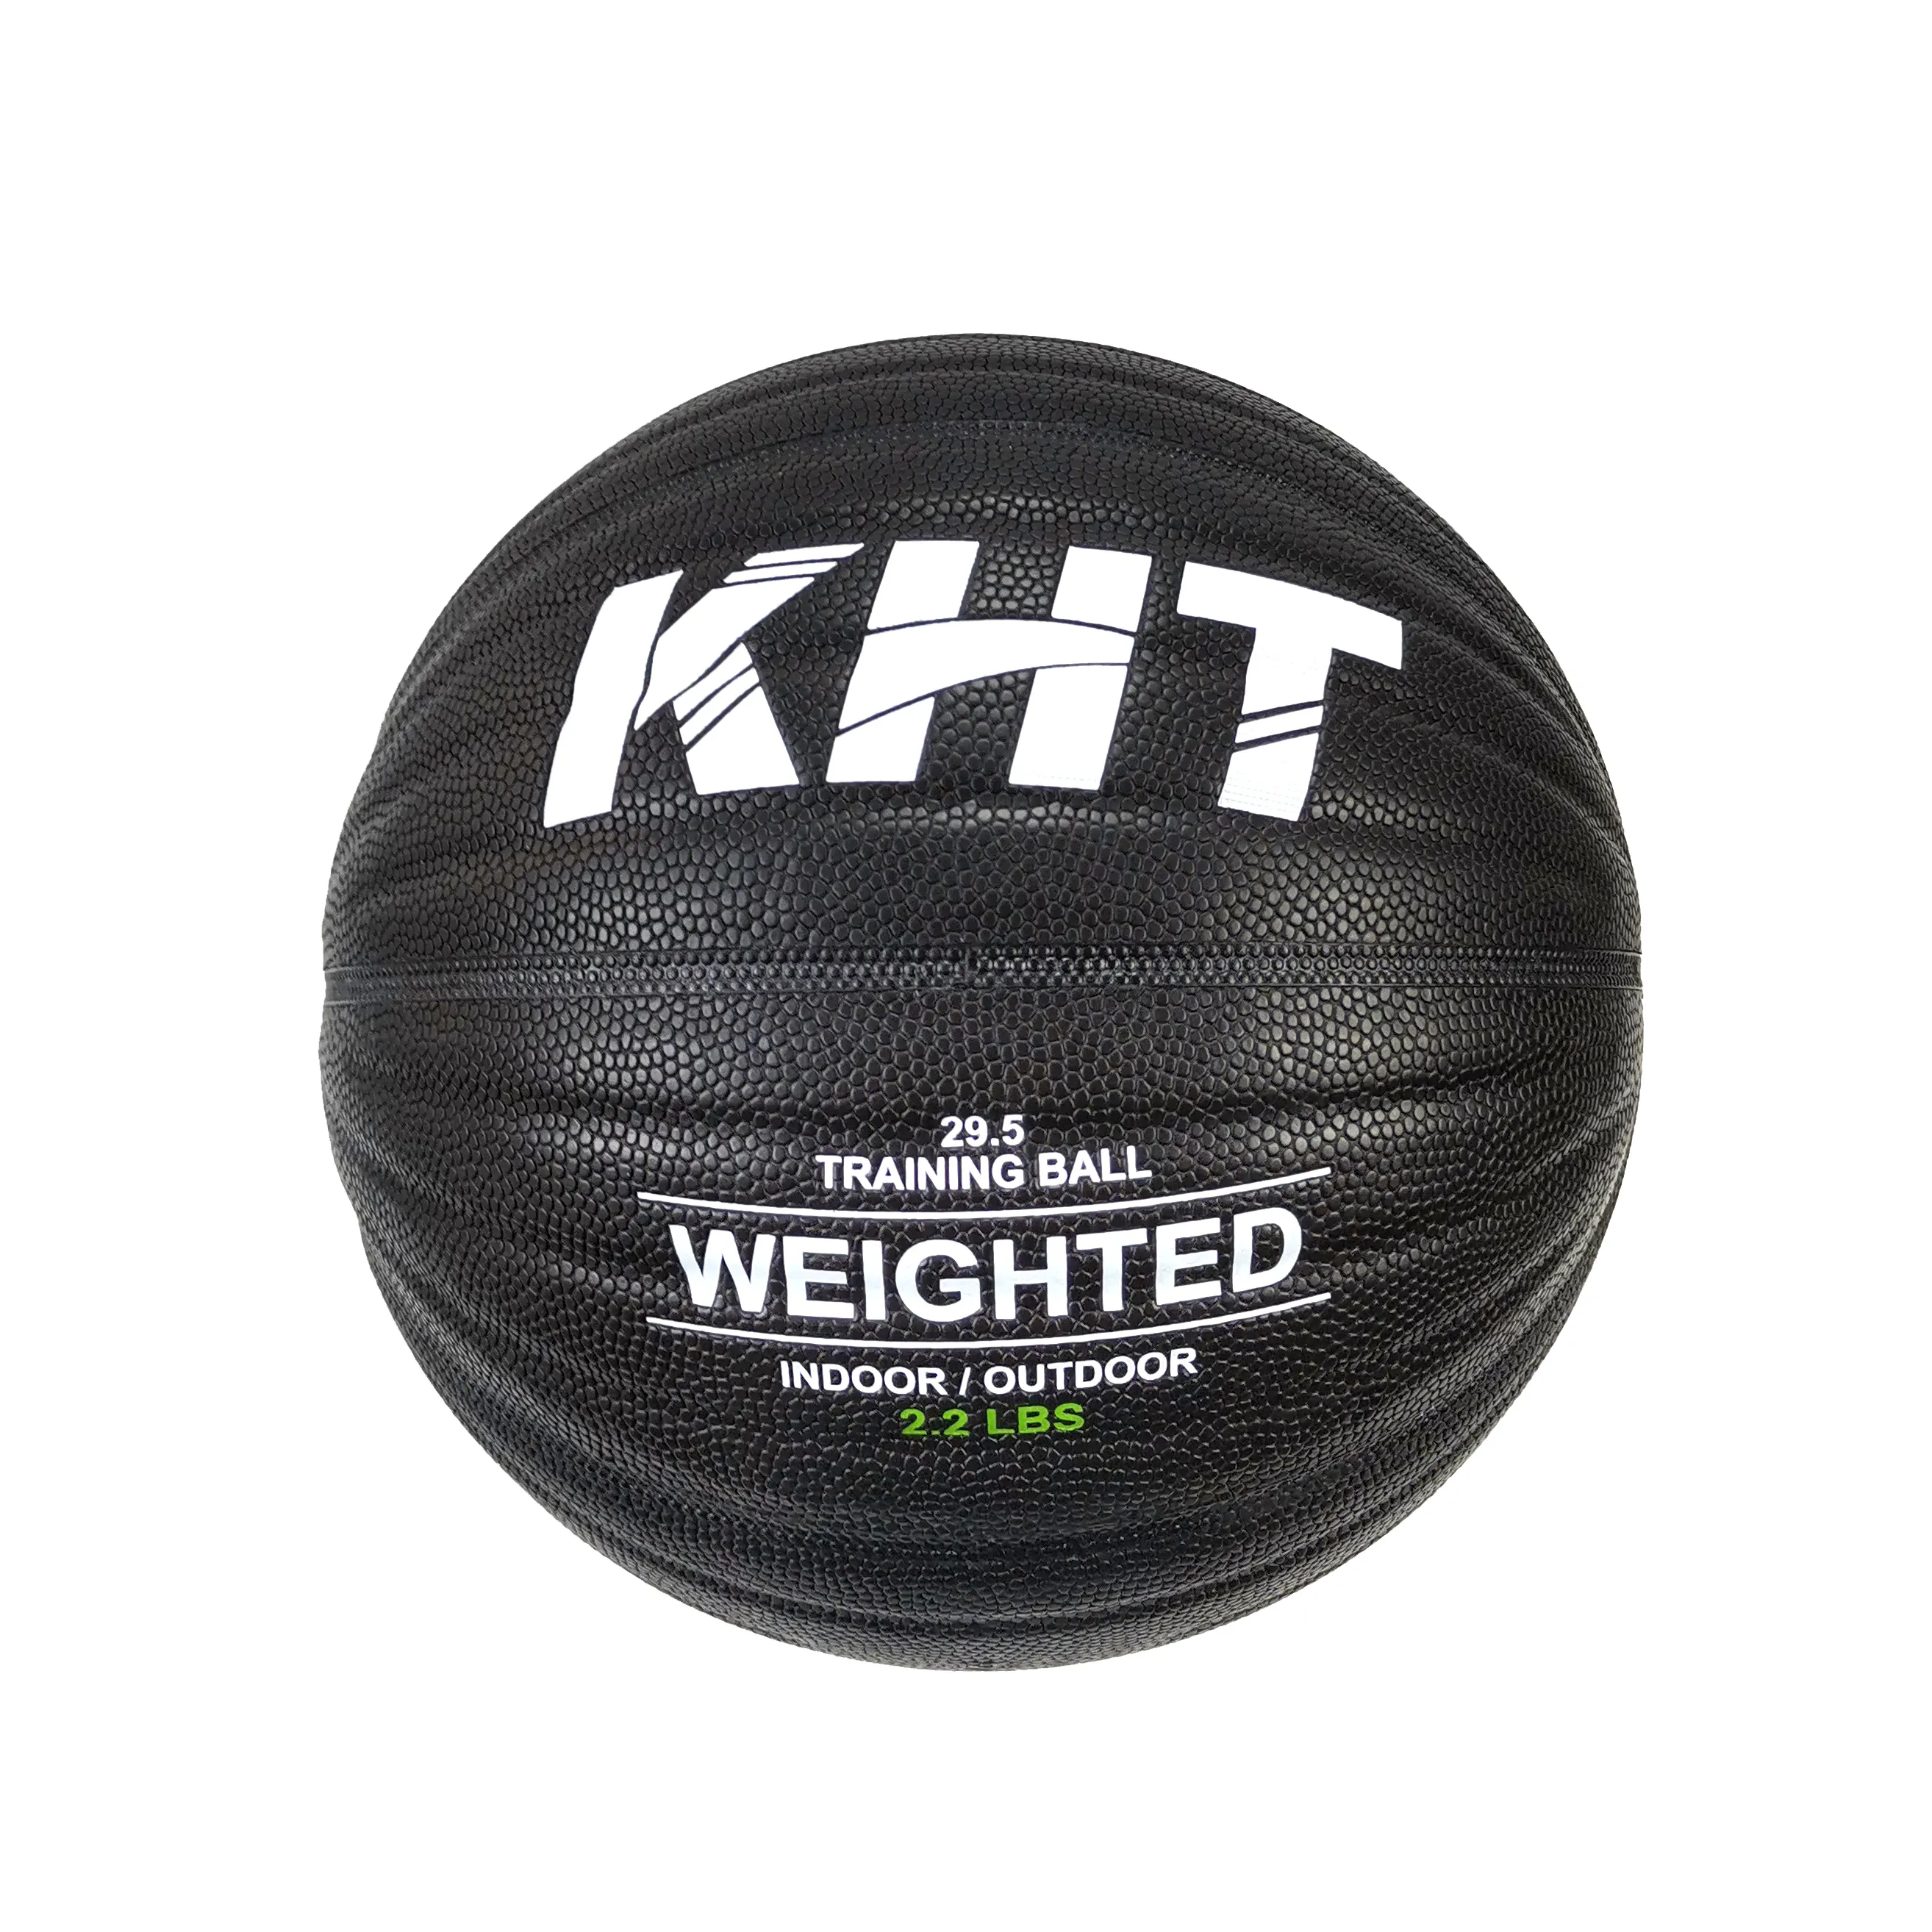 2.2LBS Wave Pattern weighted basketball for improving handling and dribbling skill 3LBS 1.3KG heavy training basketball in PU